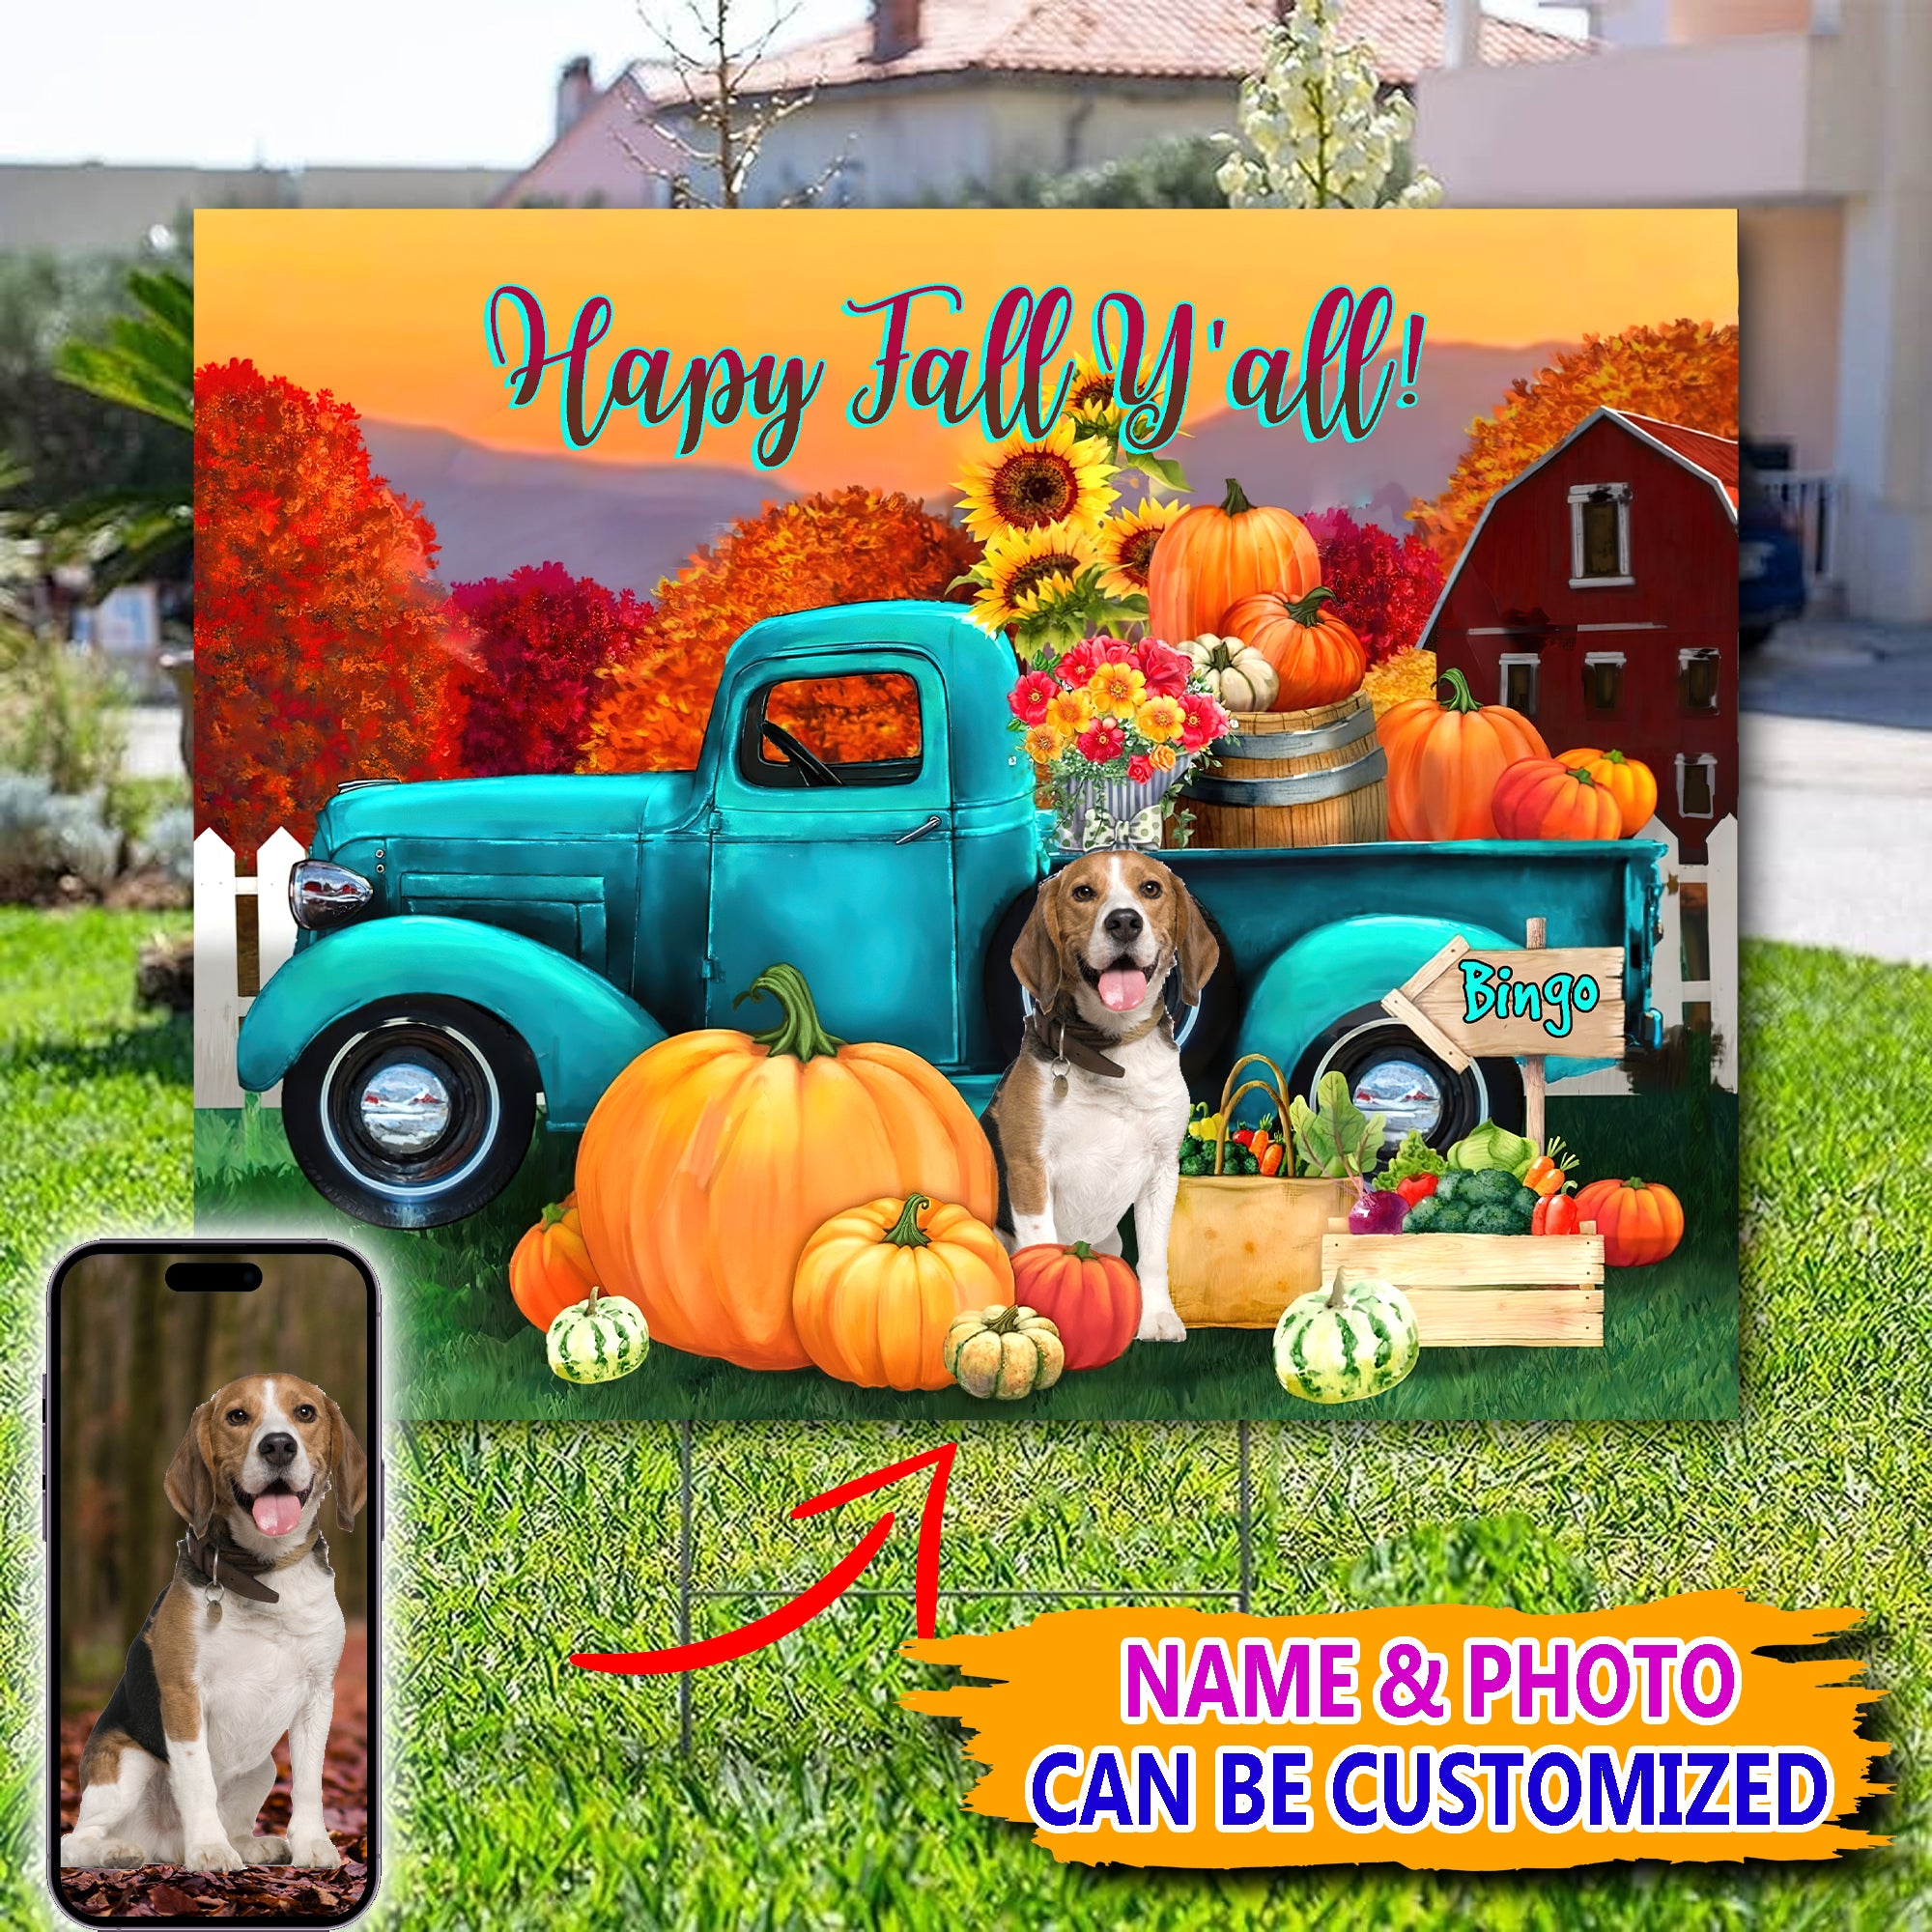 Happy Fall Y'all - Custom Photo And Name - Personalized Pet Lawn Sign, Yard Sign, Gift For Pet Lover